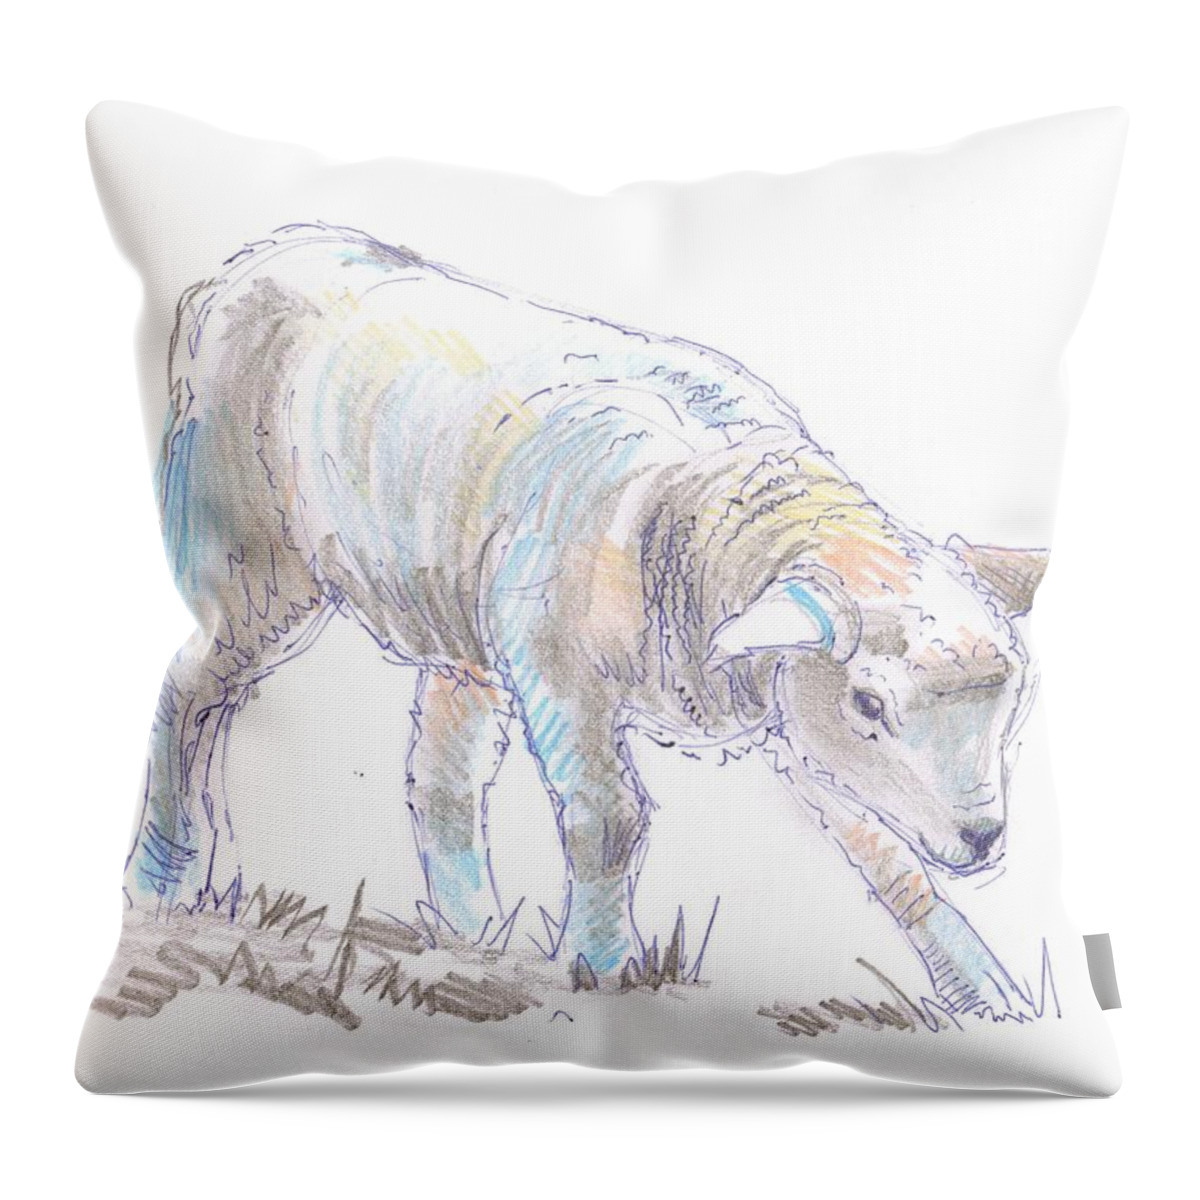 Lamb Throw Pillow featuring the drawing Lamb Sketch by Mike Jory